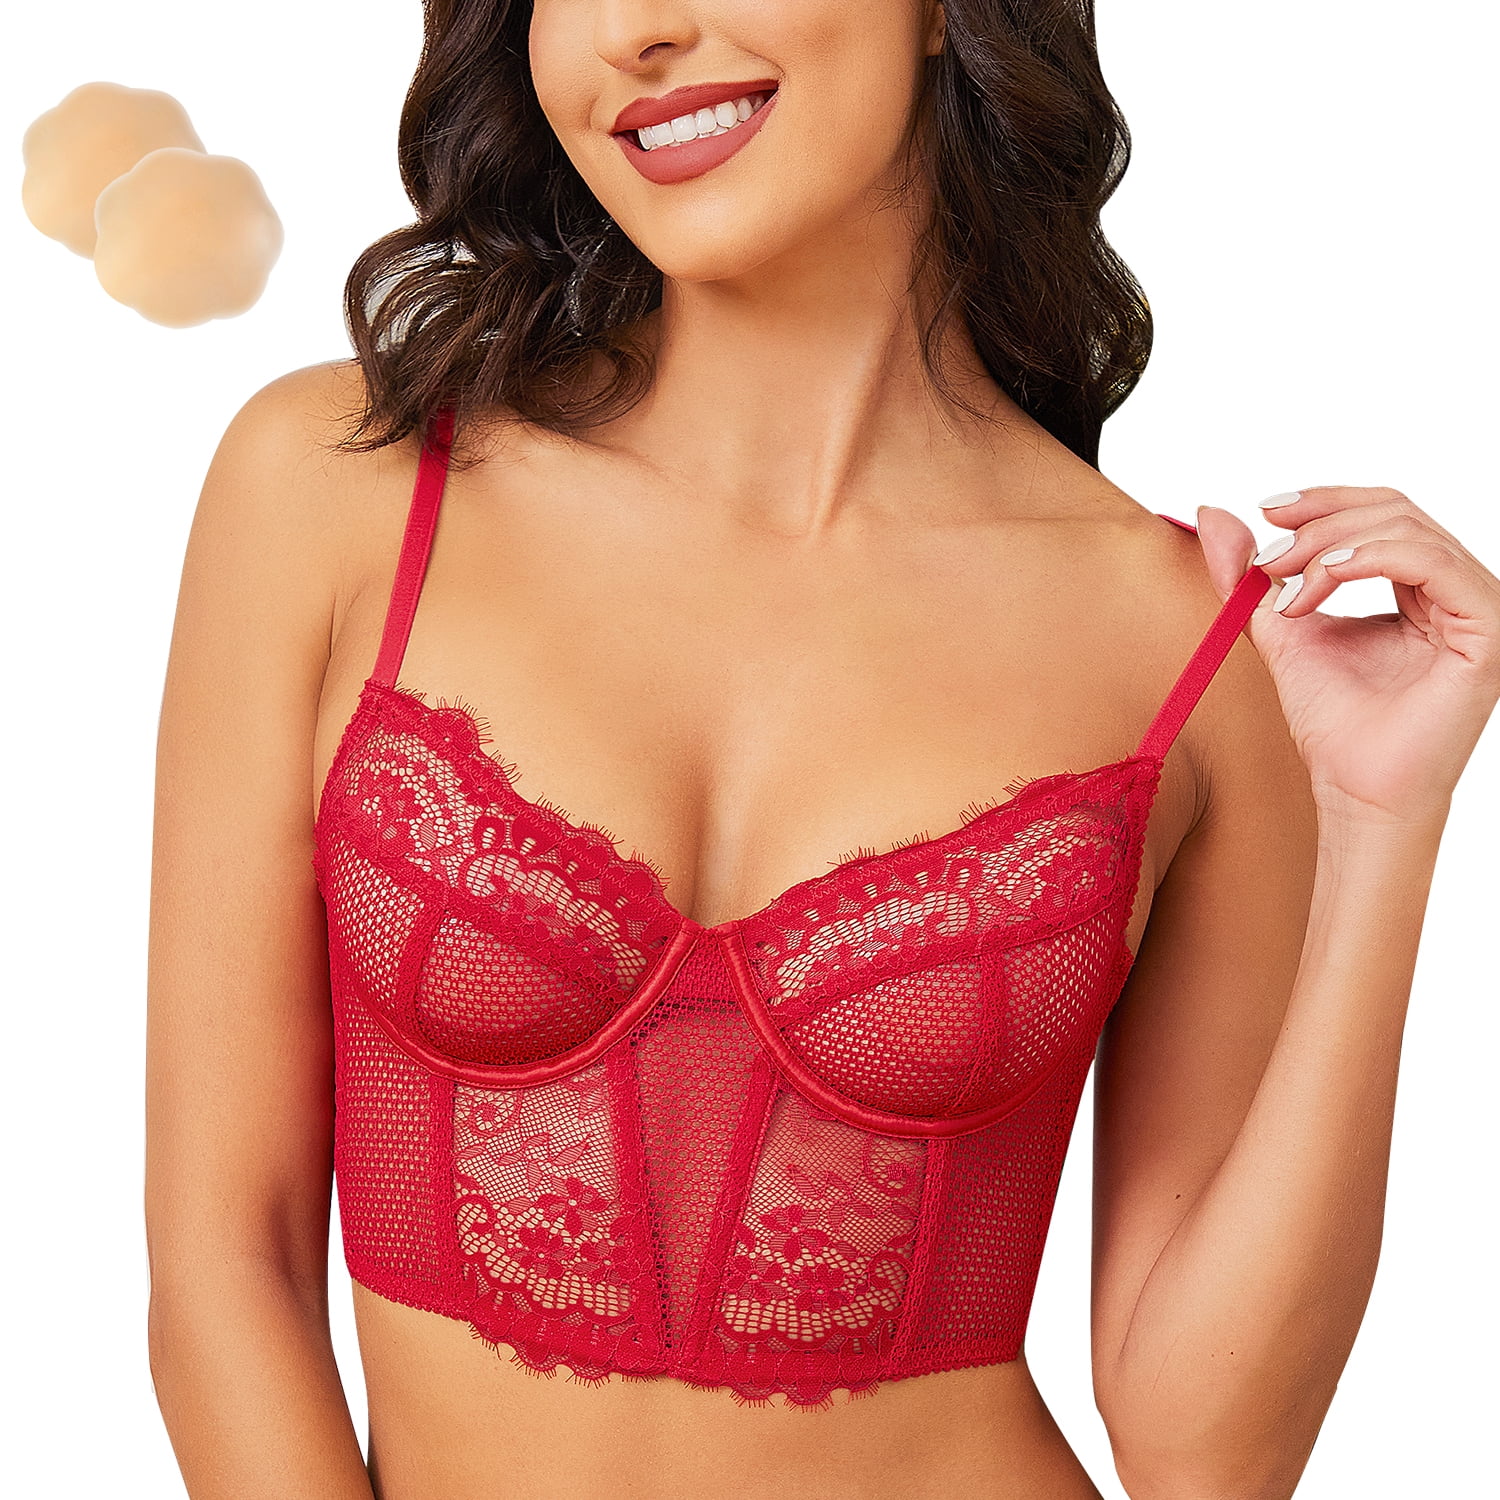 Mind Love III Underwired red soft unlined lace bra SC-797 by Kinga